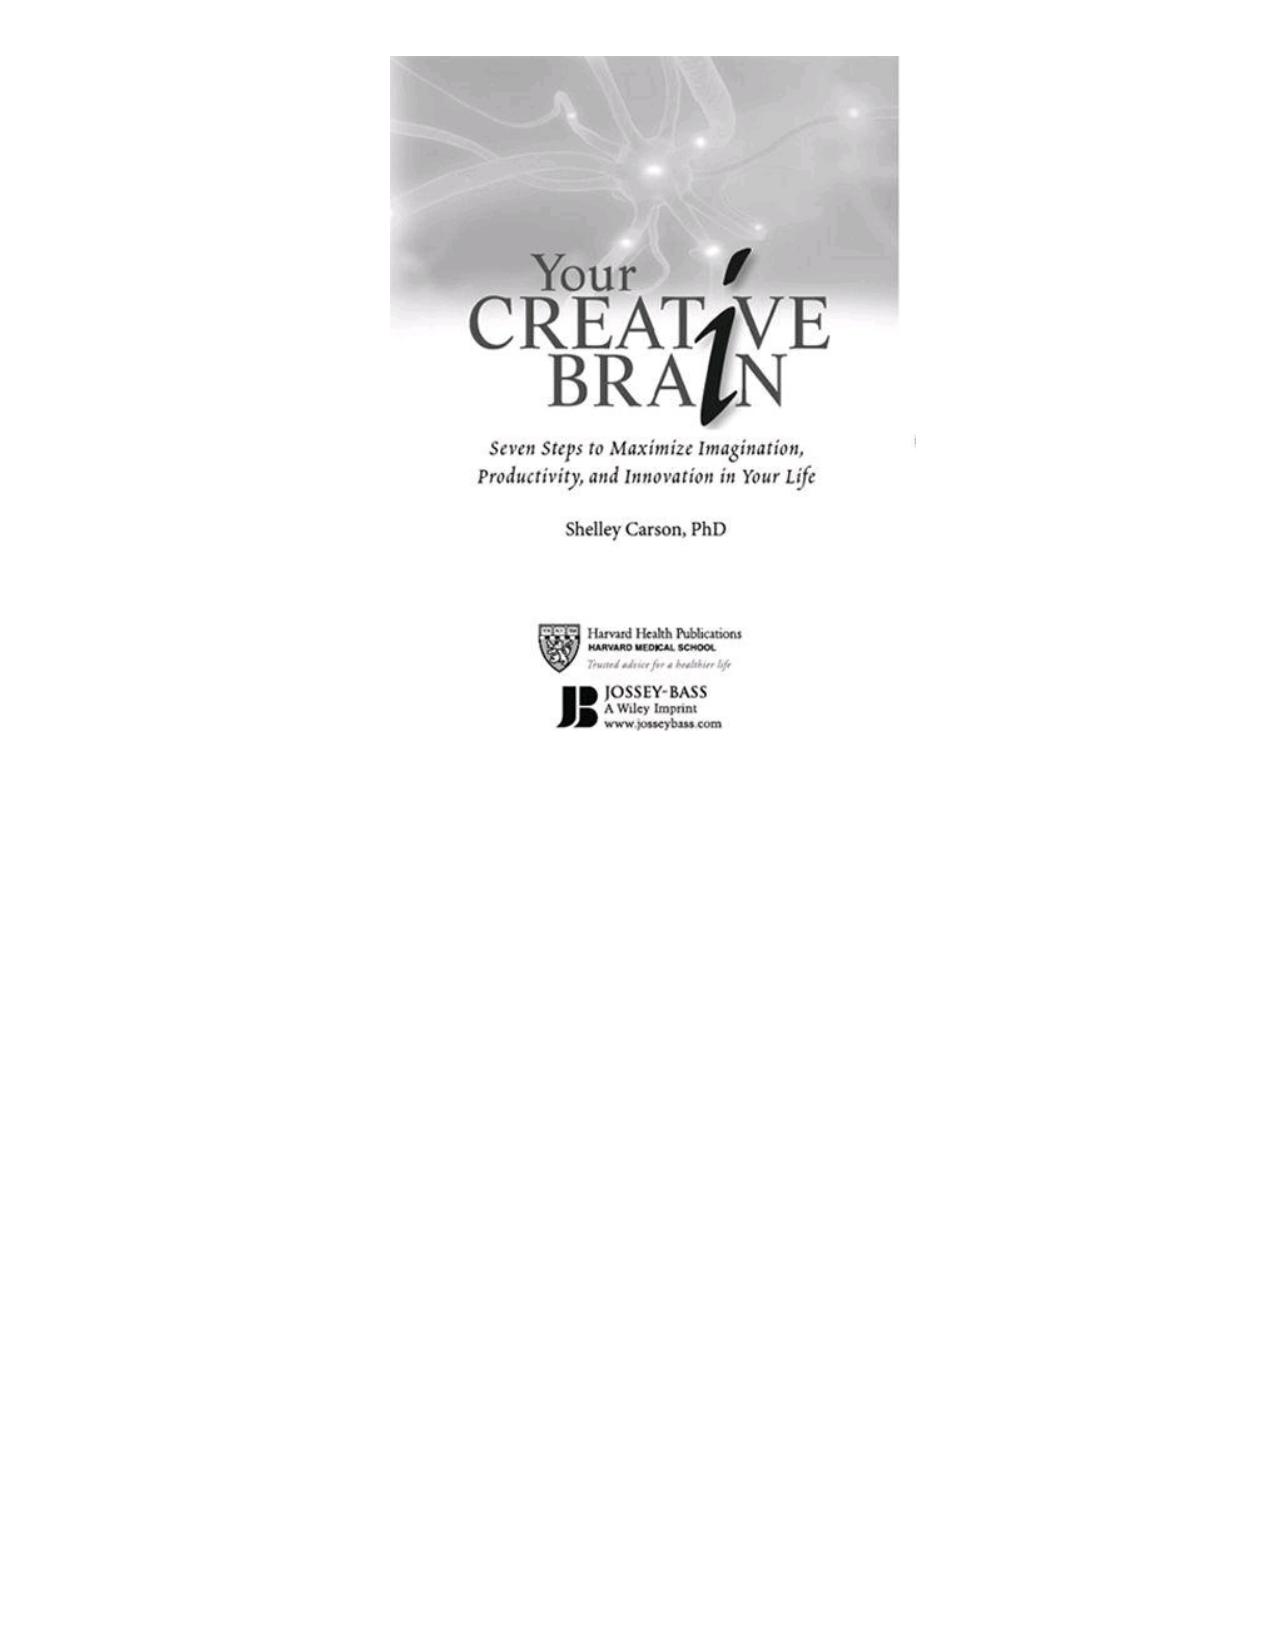 Your Creative Brain: Seven Steps to Maximize Imagination, Productivity, and Innovation in Your Life by Shelley Carson